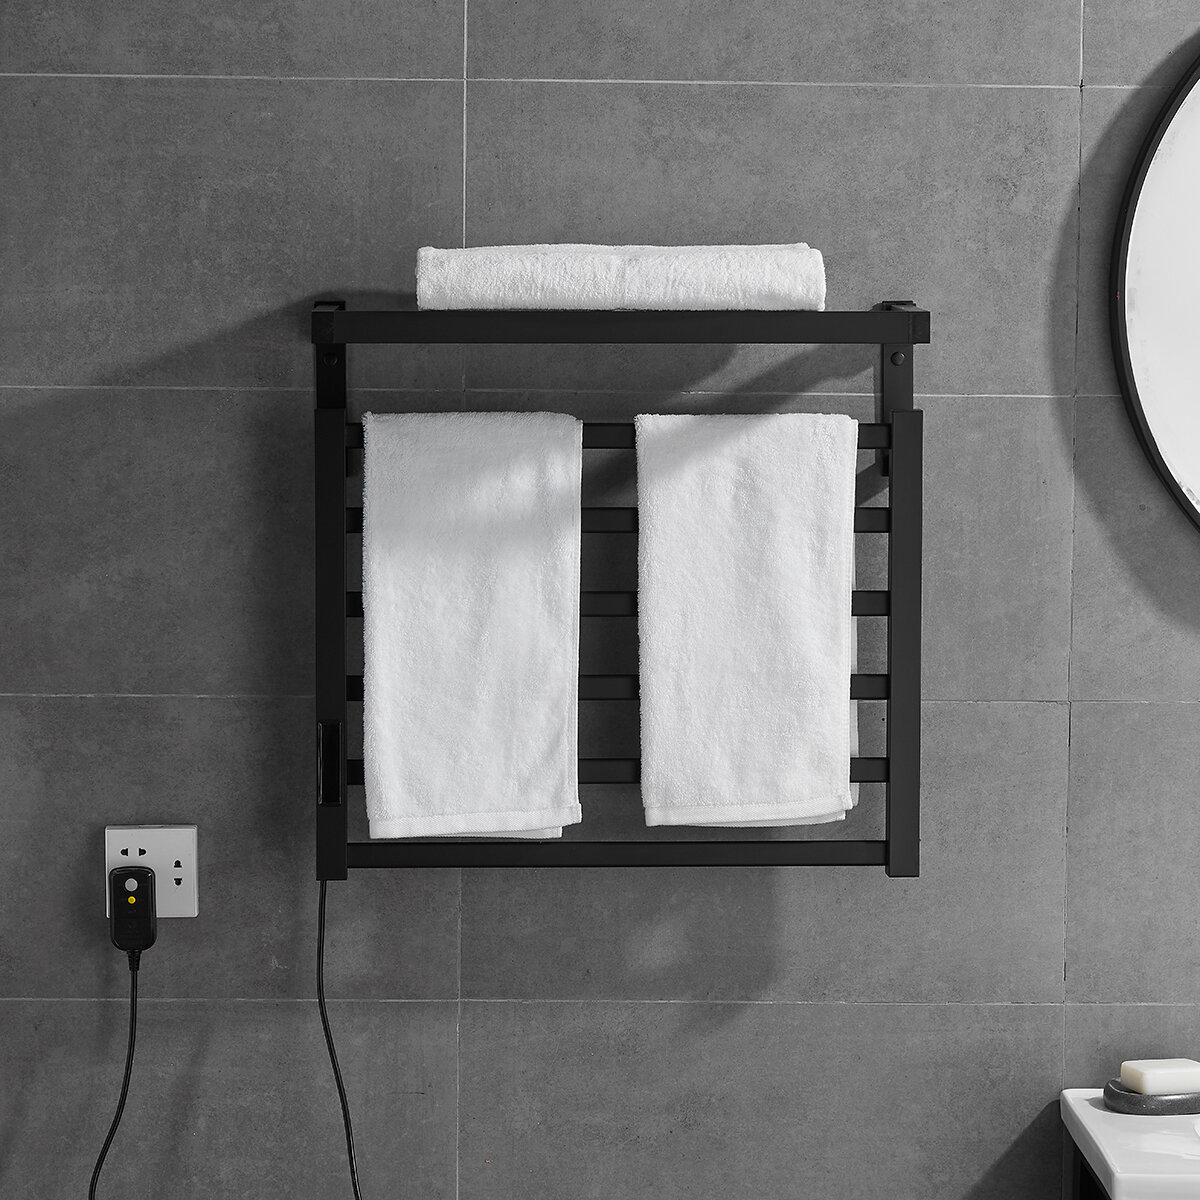 Image of Stainless Steel Electric Towel Rack Temperature Time Control Smart Heated Towel Rail Towel Warmer